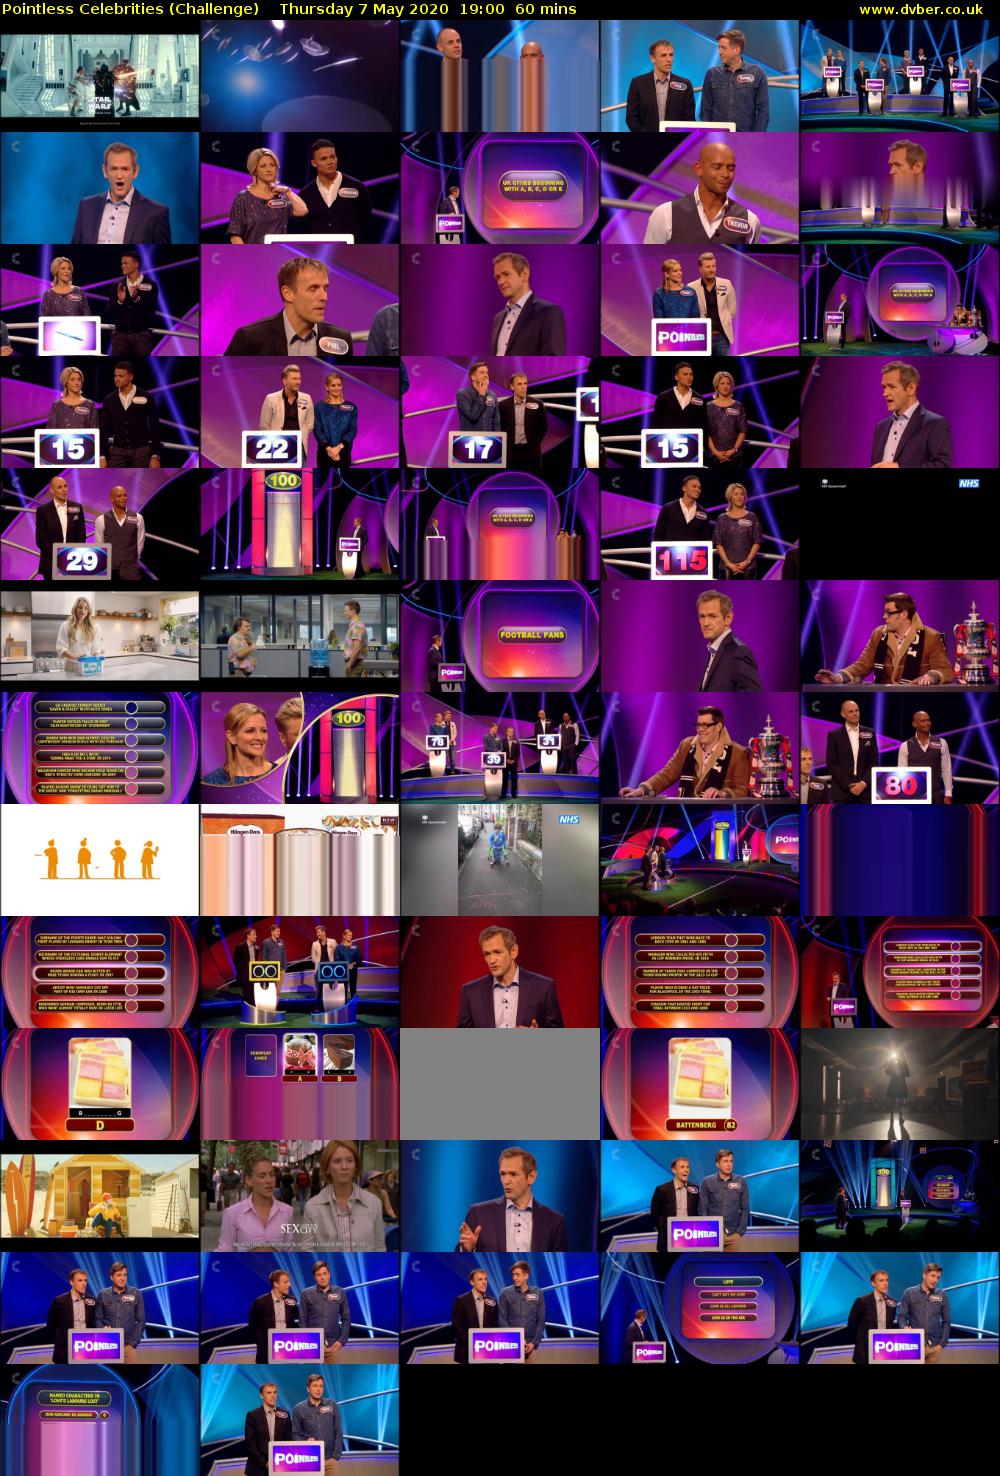 Pointless Celebrities (Challenge) Thursday 7 May 2020 19:00 - 20:00